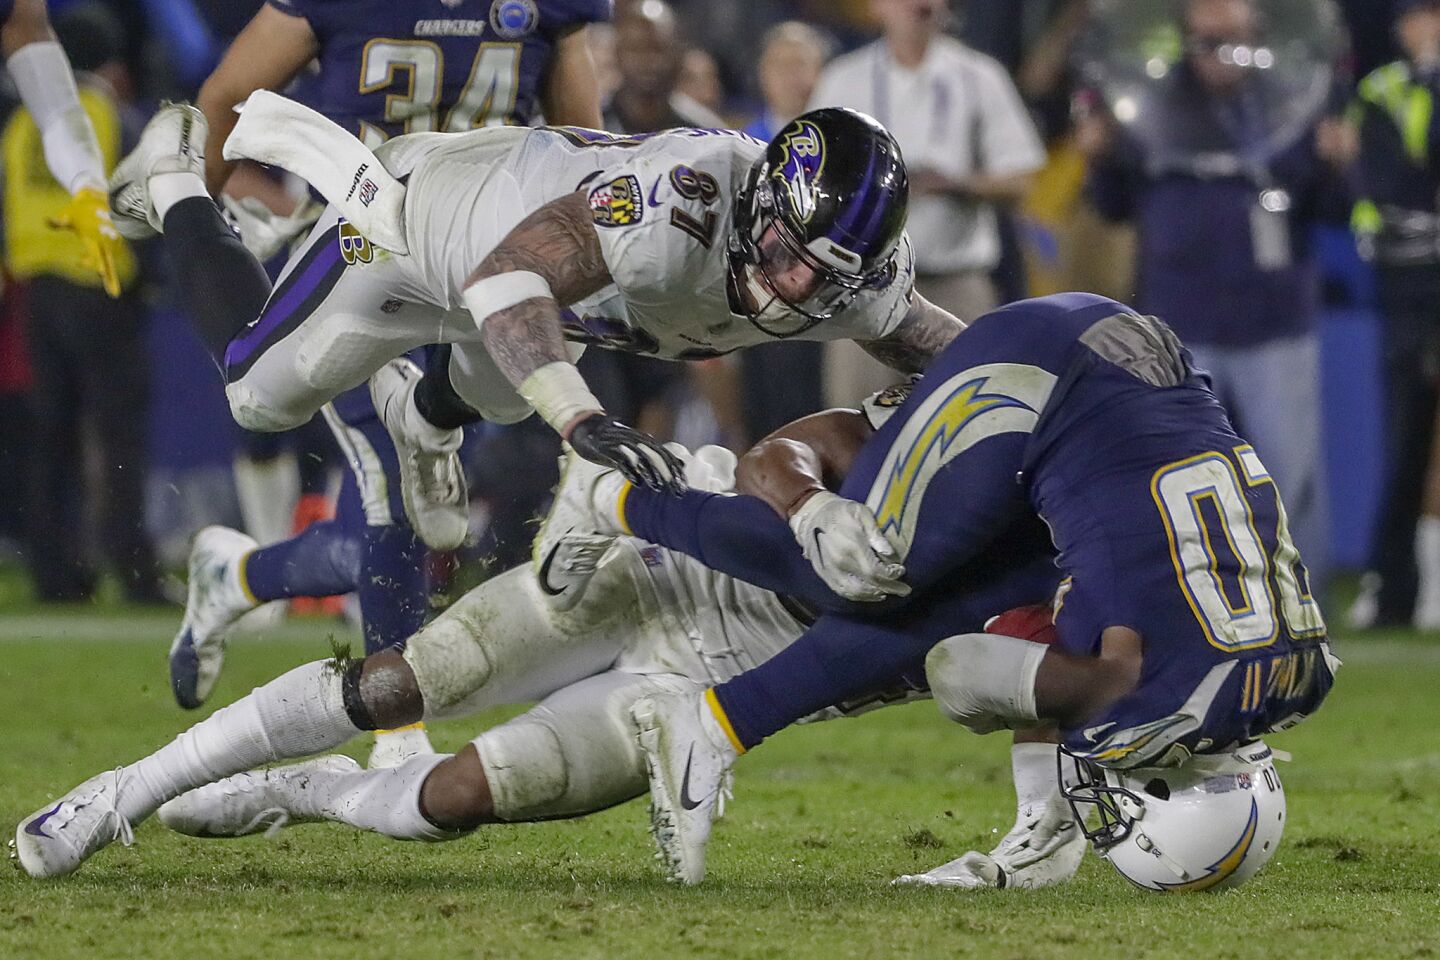 Chargers punt returner Desond King III is toppled after 24-yard return late in the game against the Ravens at StubHub Center.